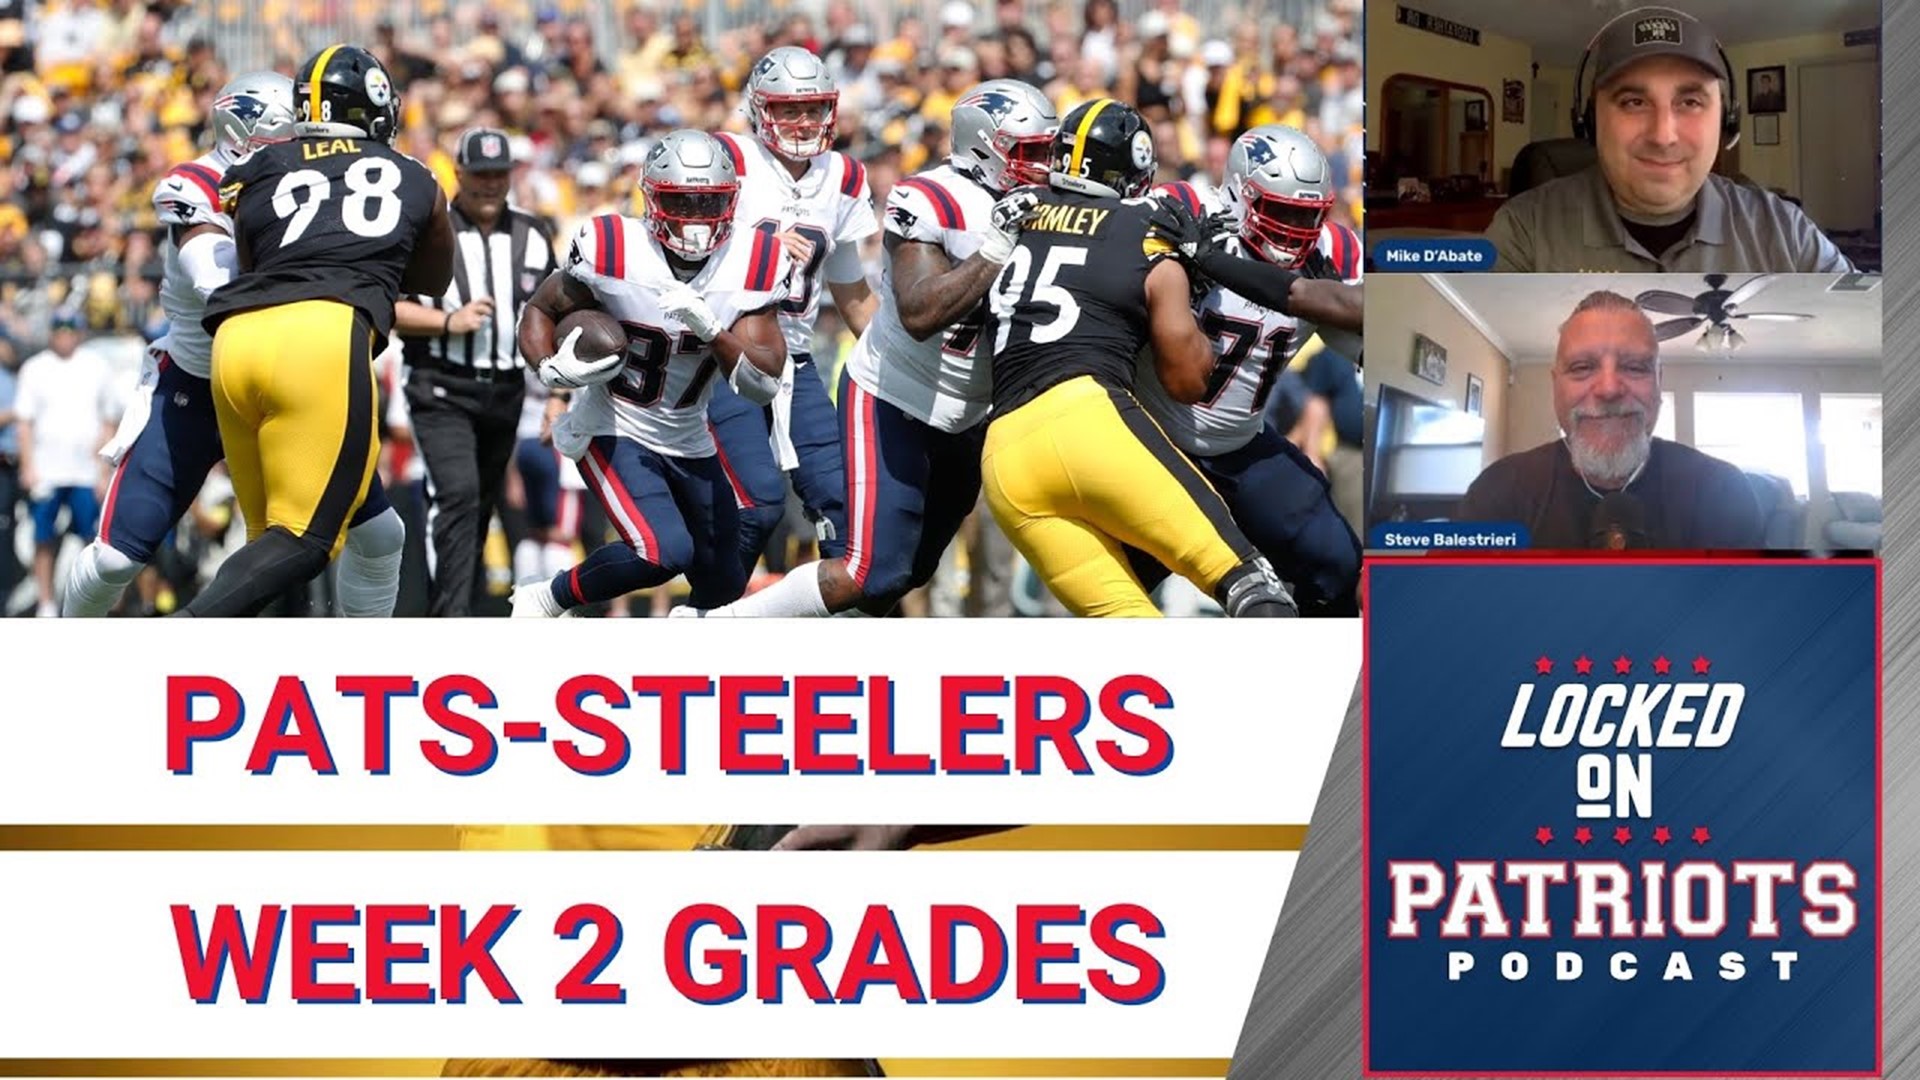 The New England Patriots continue to take stock in their performance in their 17-14 win over the Pittsburgh Steelers on Sunday.